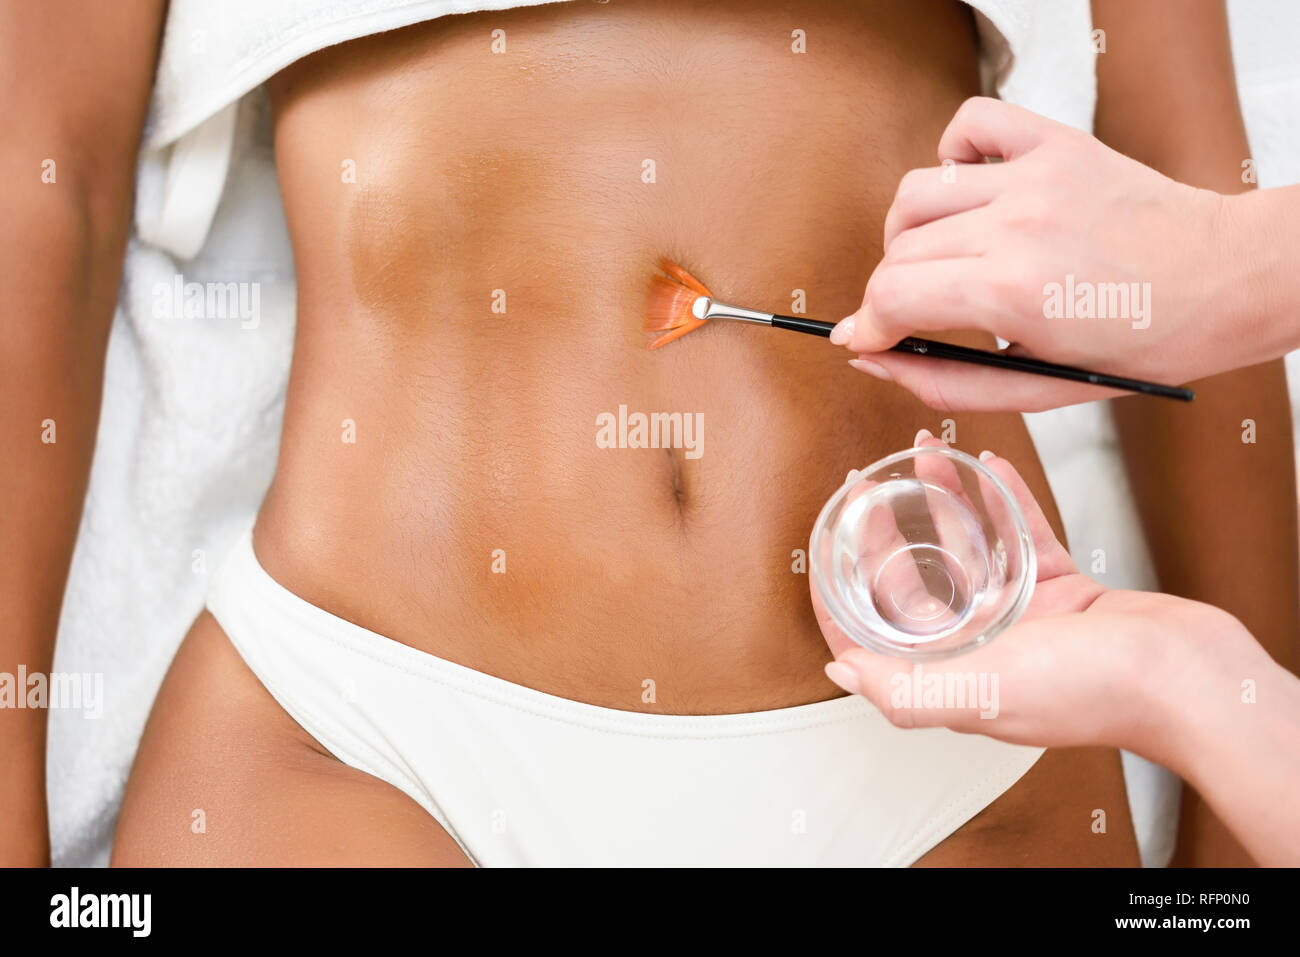 Woman receiving belly massage treatment with oil brush in spa wellness center. Beauty and Aesthetic concepts. Stock Photo